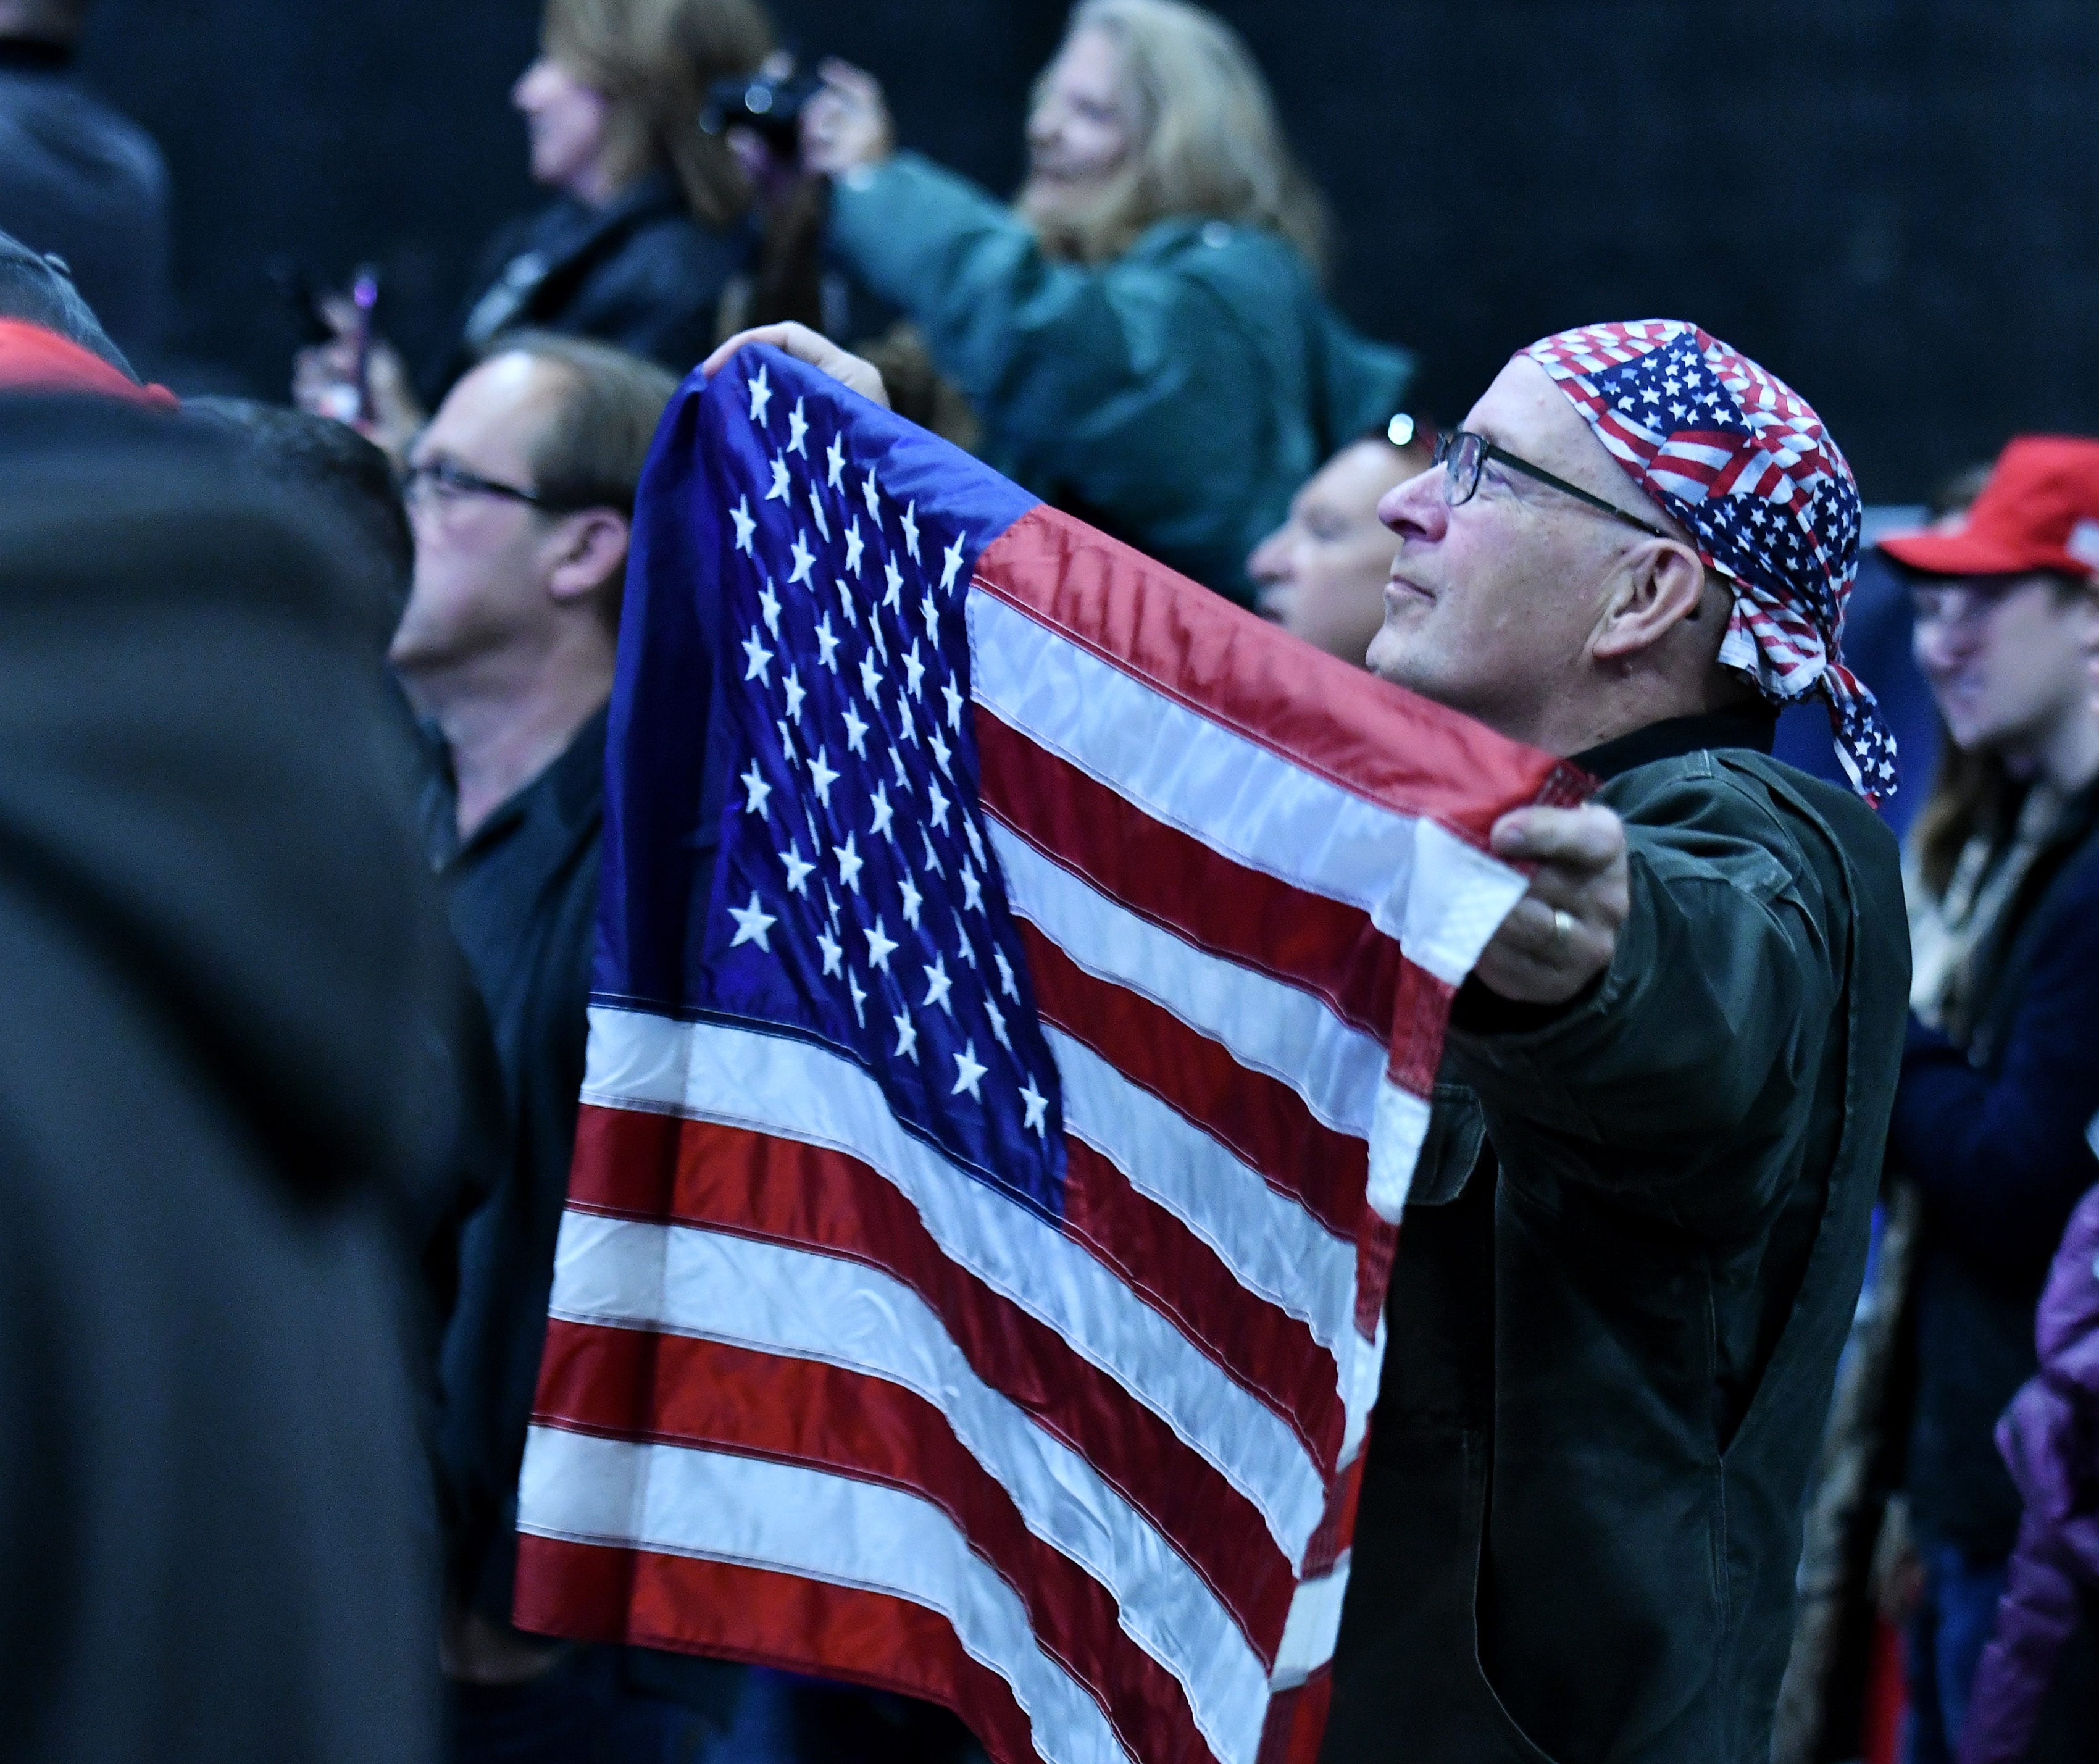 Mark Jaruzel of Mayville, Mich. holds up a large flag during the rally.    "Protect The American Dream Rally" for Republican candidate for U.S. Senate John James at the Flagstar Strand Theatre in Pontiac, Mich. on Oct 17, 2018. 
(Robin Buckson / The Detroit News)